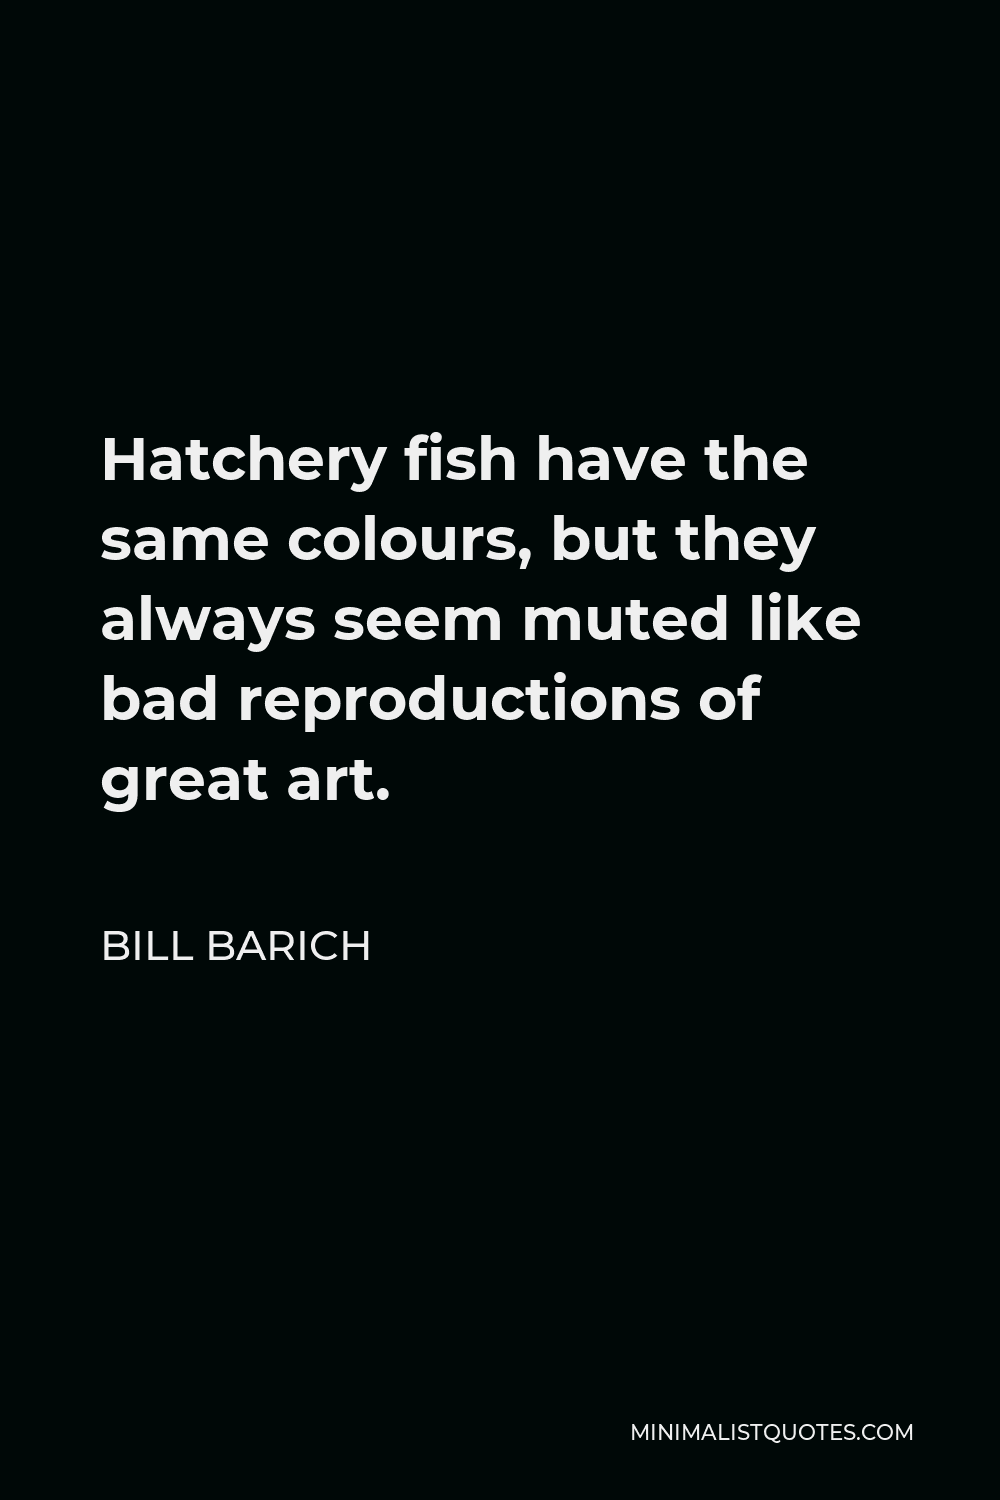 Bill Barich Quote - Hatchery fish have the same colours, but they always seem muted like bad reproductions of great art.